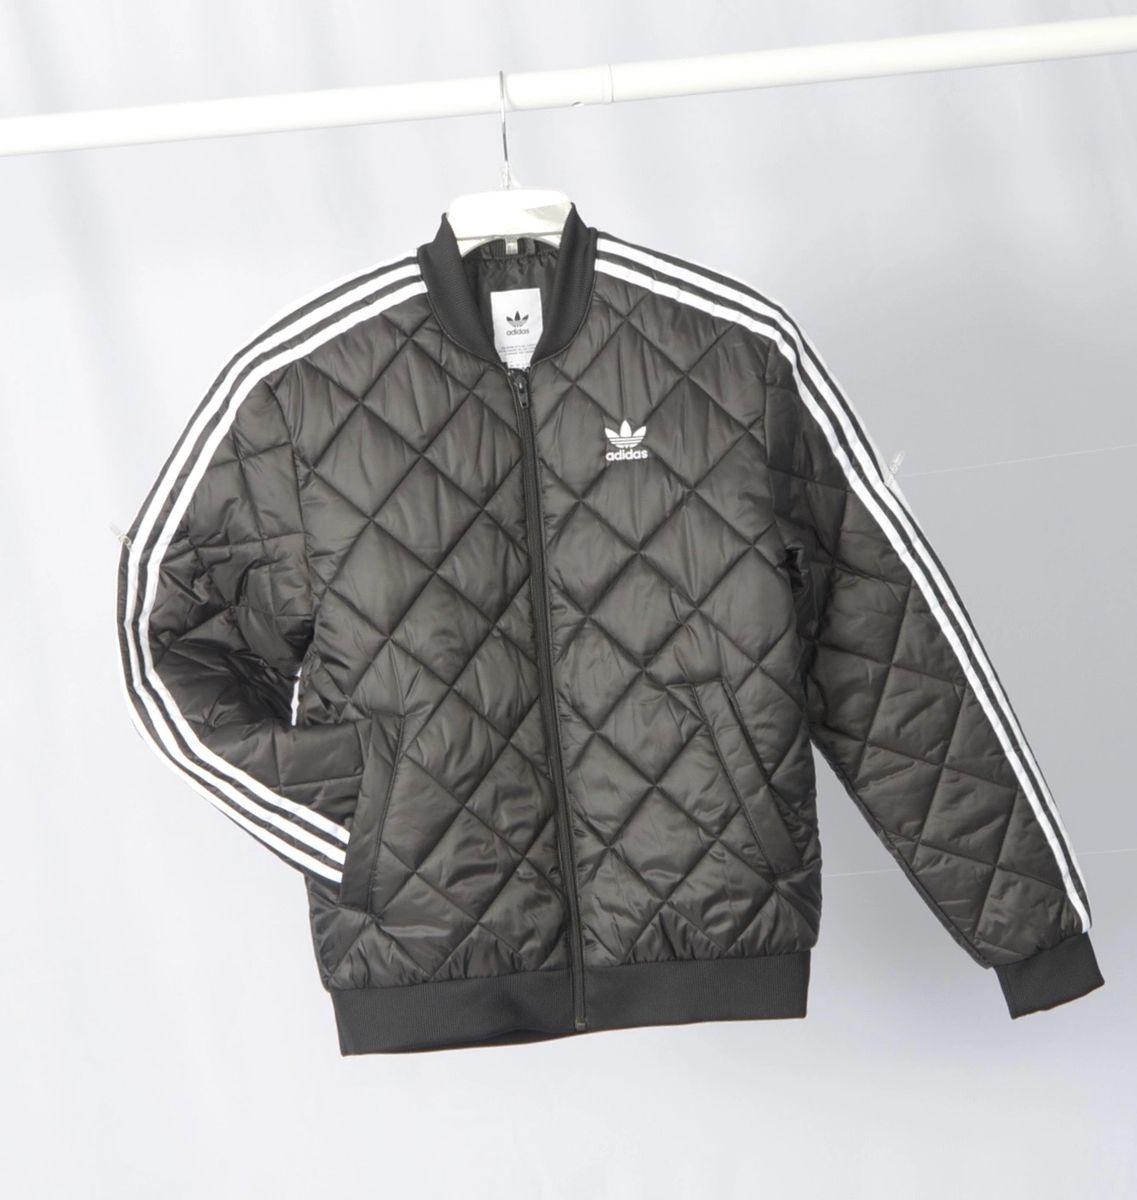 Adidas SST Quilted Jacket, Black/White, Size S to XL